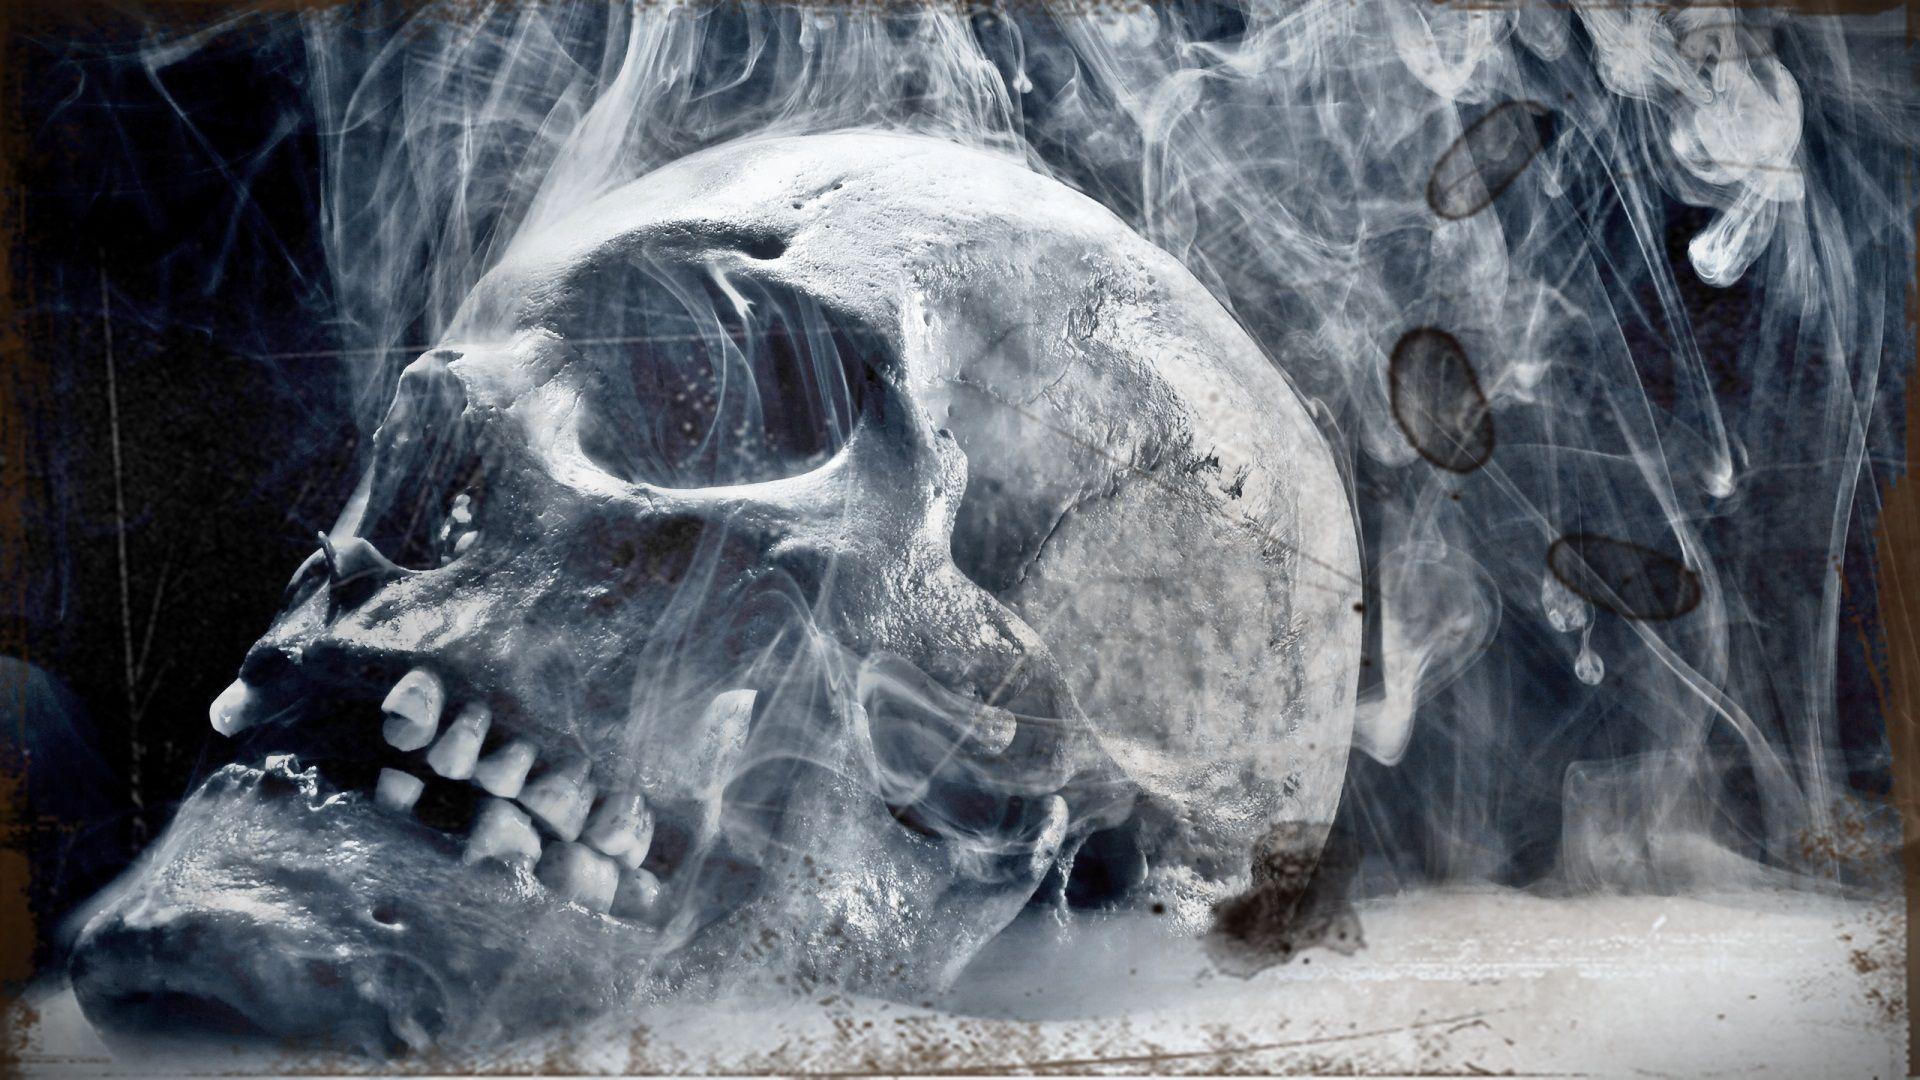 7,400+ Smoke Skull Stock Photos, Pictures & Royalty-Free Images - iStock |  Smoker, Death, Danger